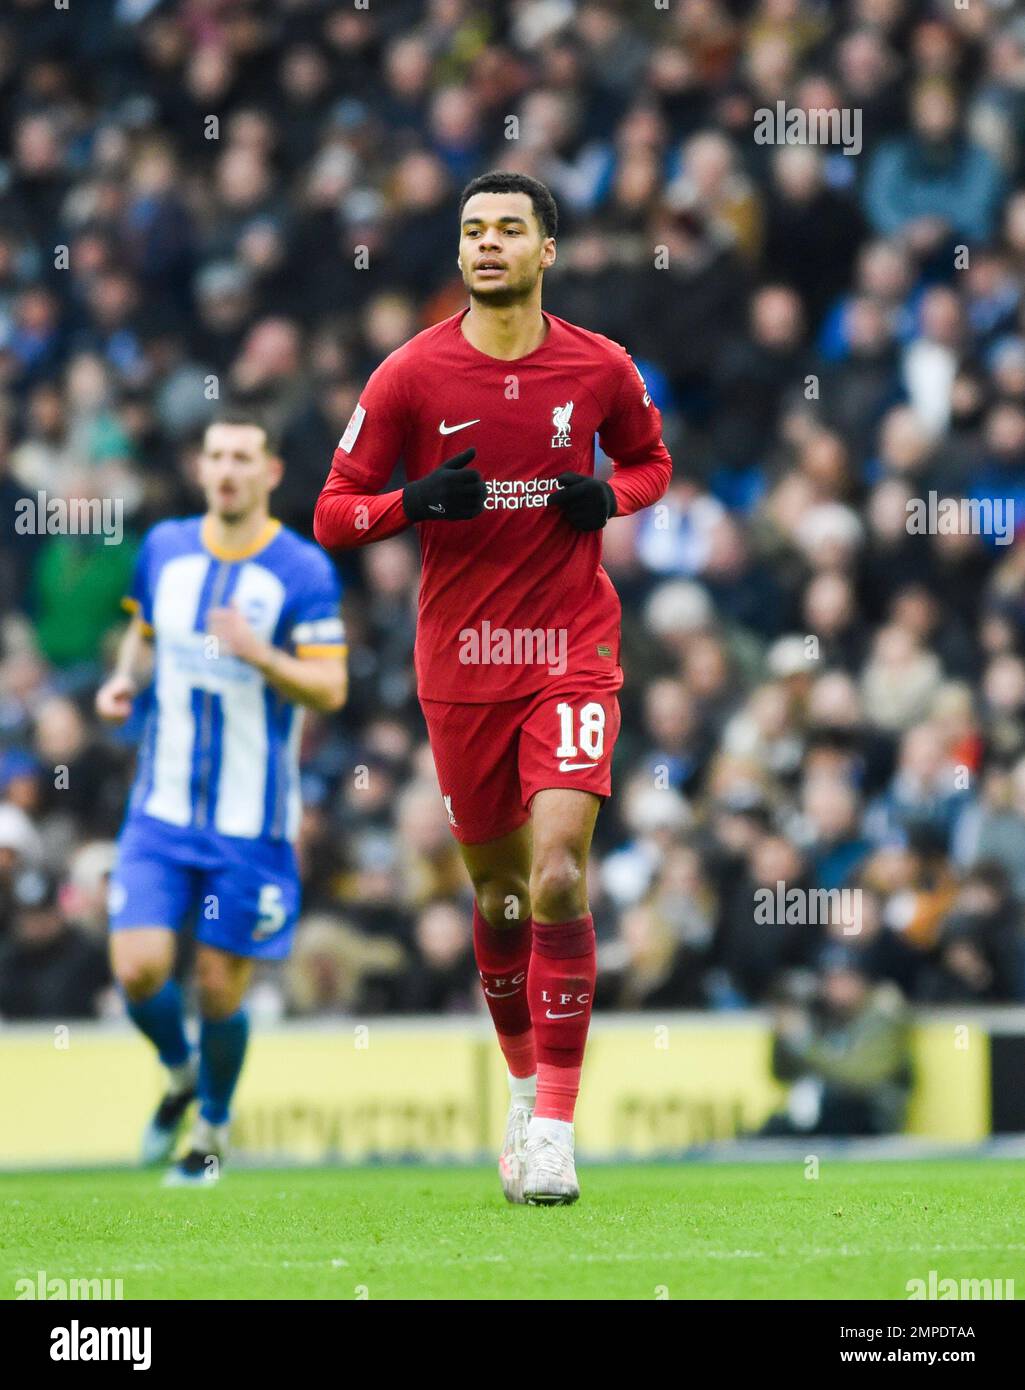 Cody Gakpo of Liverpool during the Emirates FA Cup Fourth Round match between Brighton & Hove Albion and  Liverpool at The American Express Community Stadium , Brighton , UK - 29th January 2023  Photo Simon Dack/Telephoto Images. Editorial use only. No merchandising. For Football images FA and Premier League restrictions apply inc. no internet/mobile usage without FAPL license - for details contact Football Dataco Stock Photo